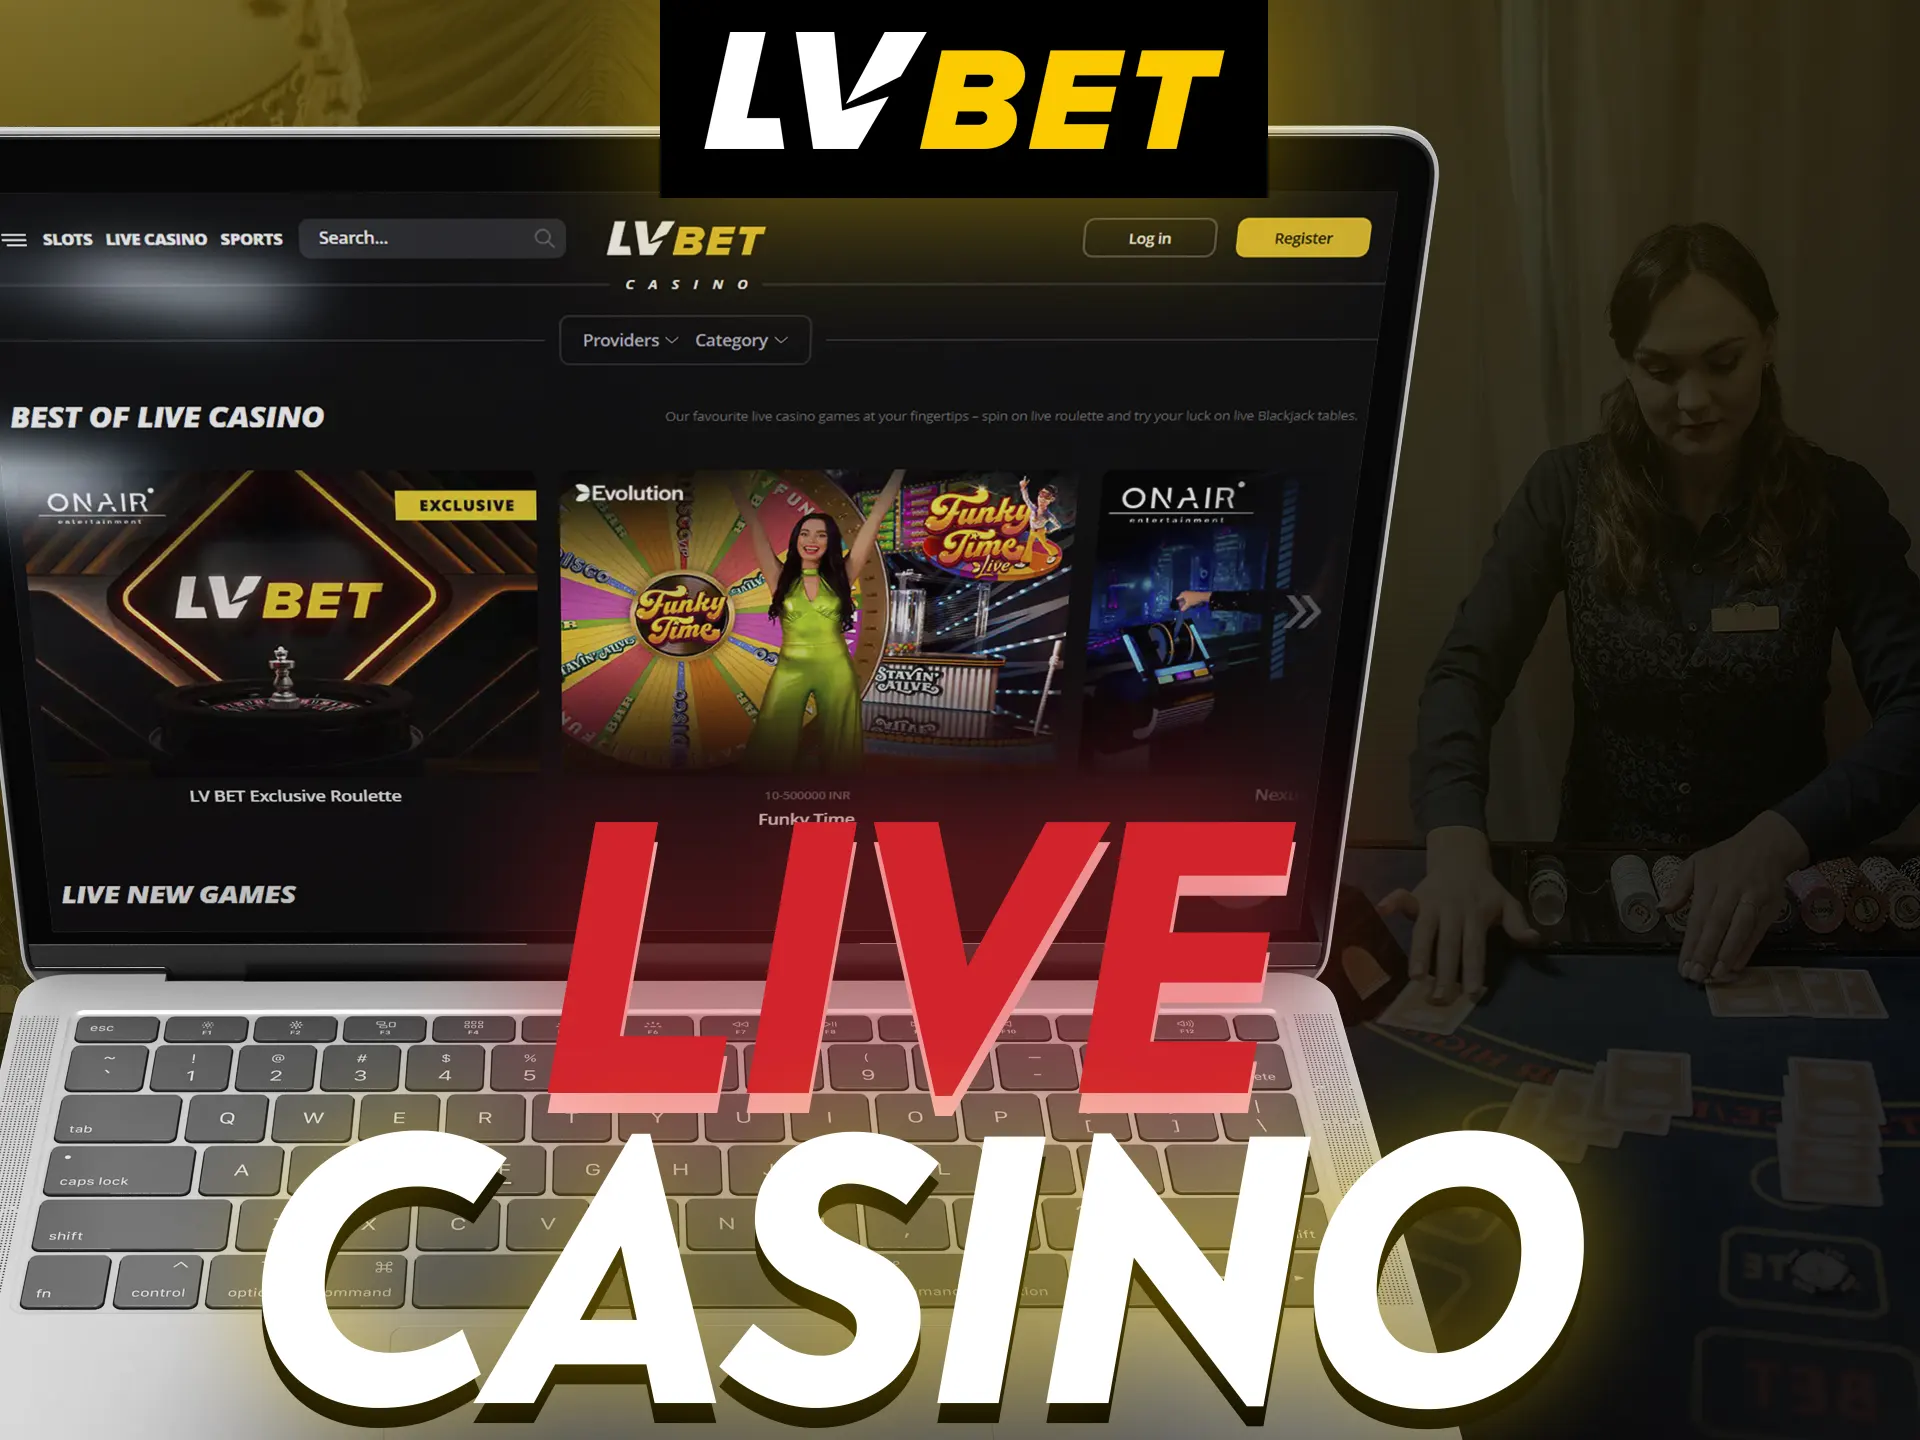 Play live casino games with real dealers at LV Bet.